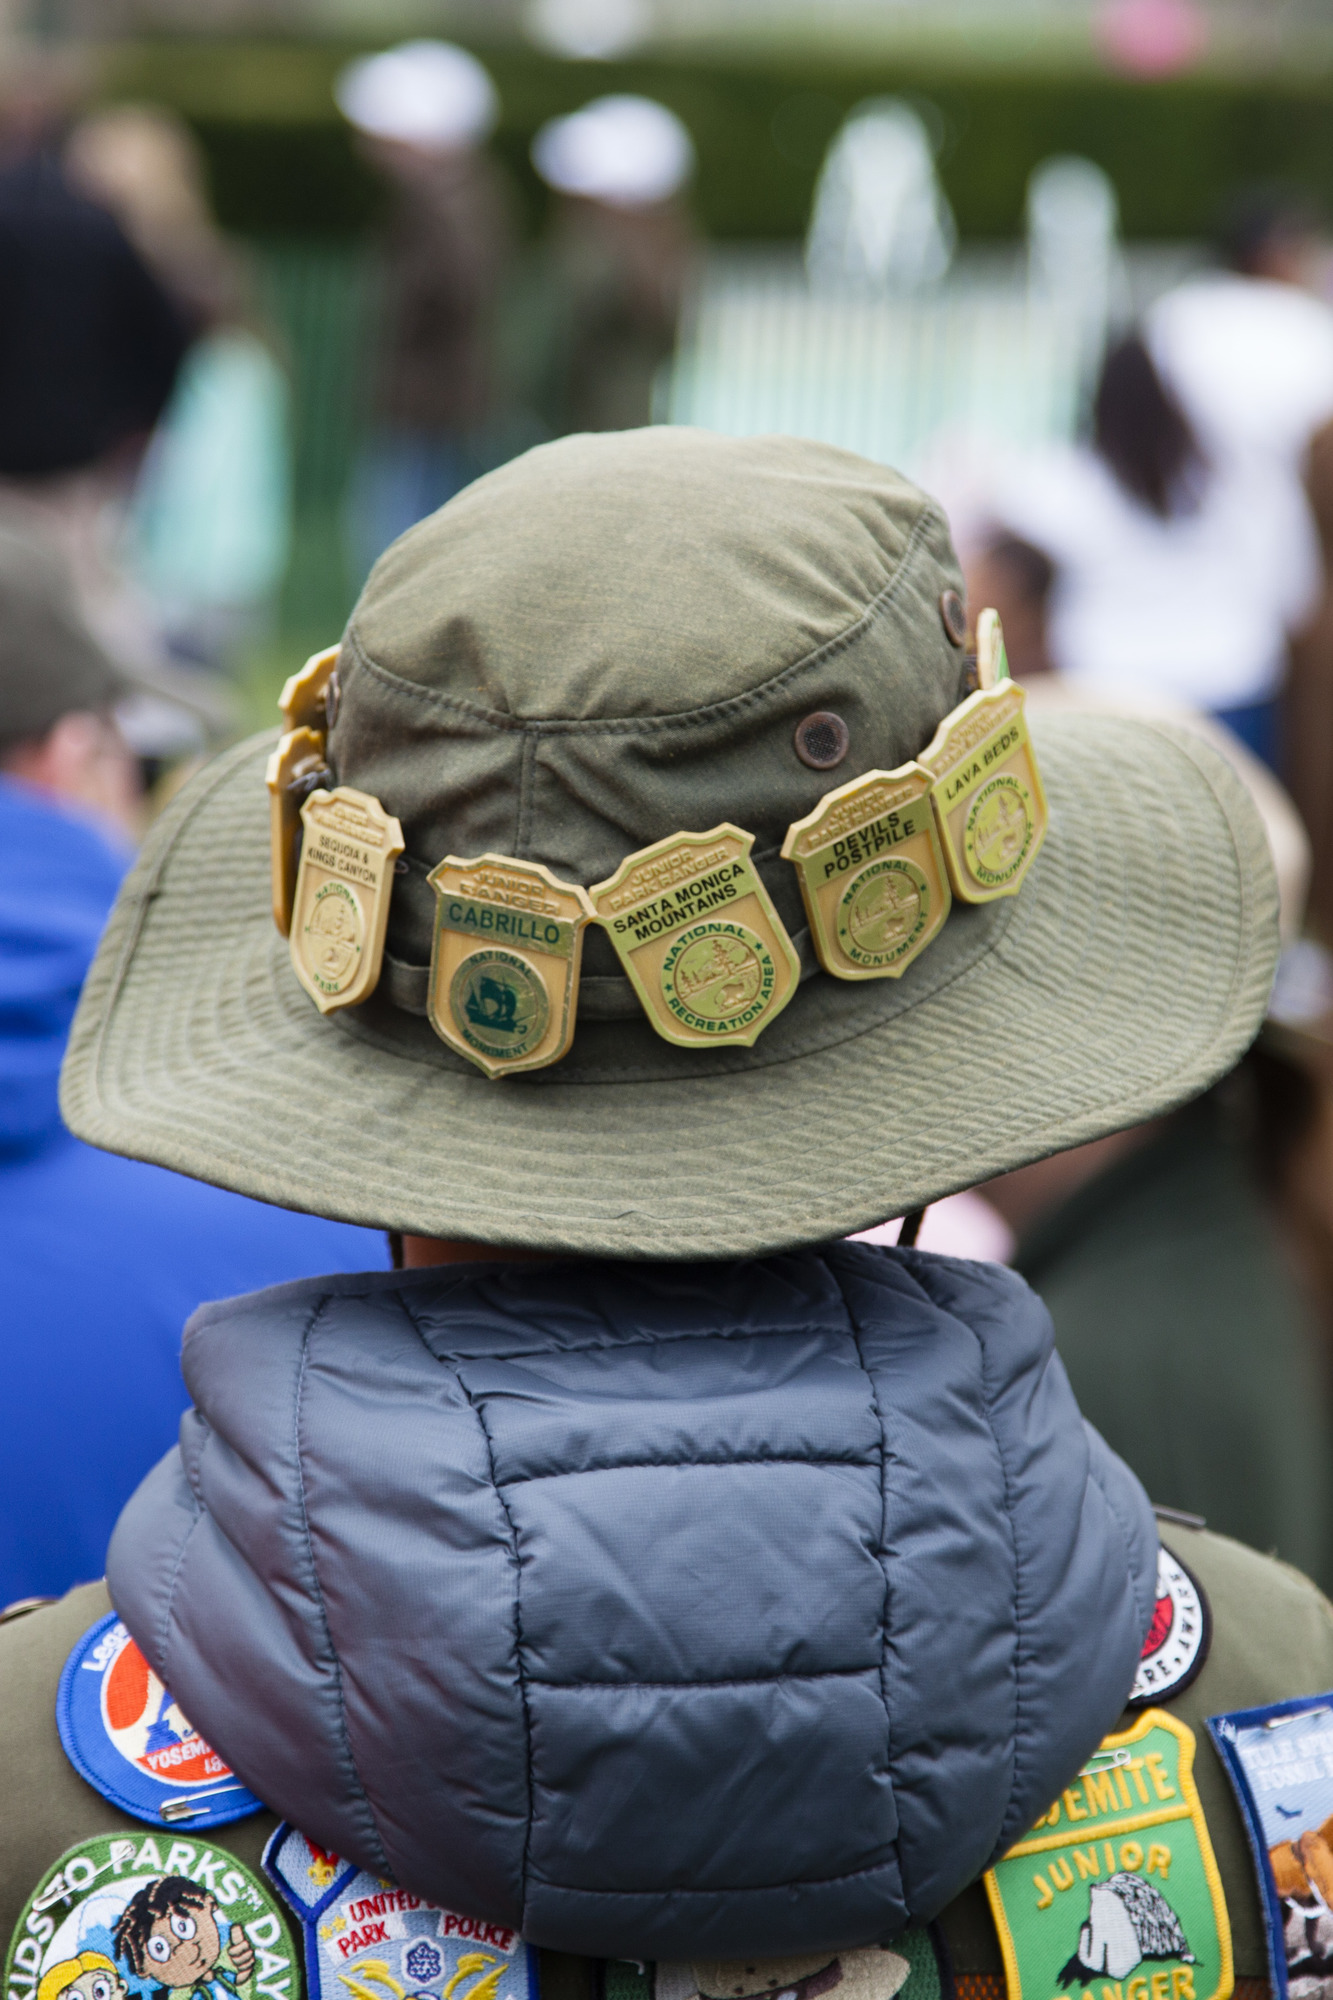 A Junior Ranger showcases his badges from across the country.